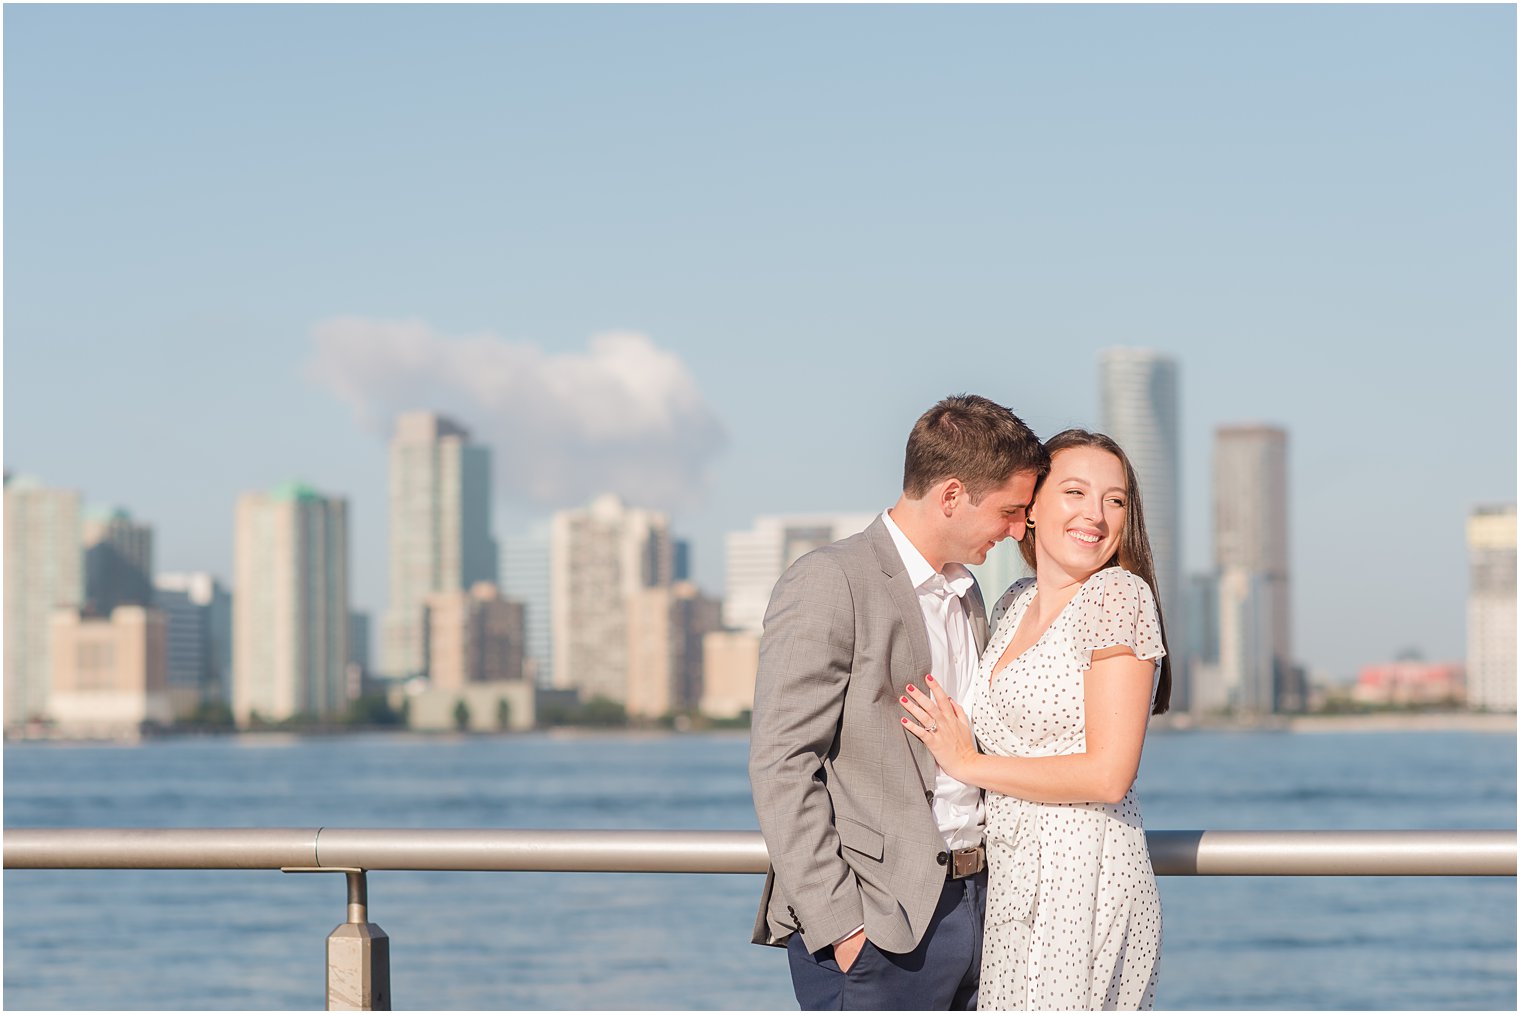 Hudson River Greenway engagement portraits in NYC